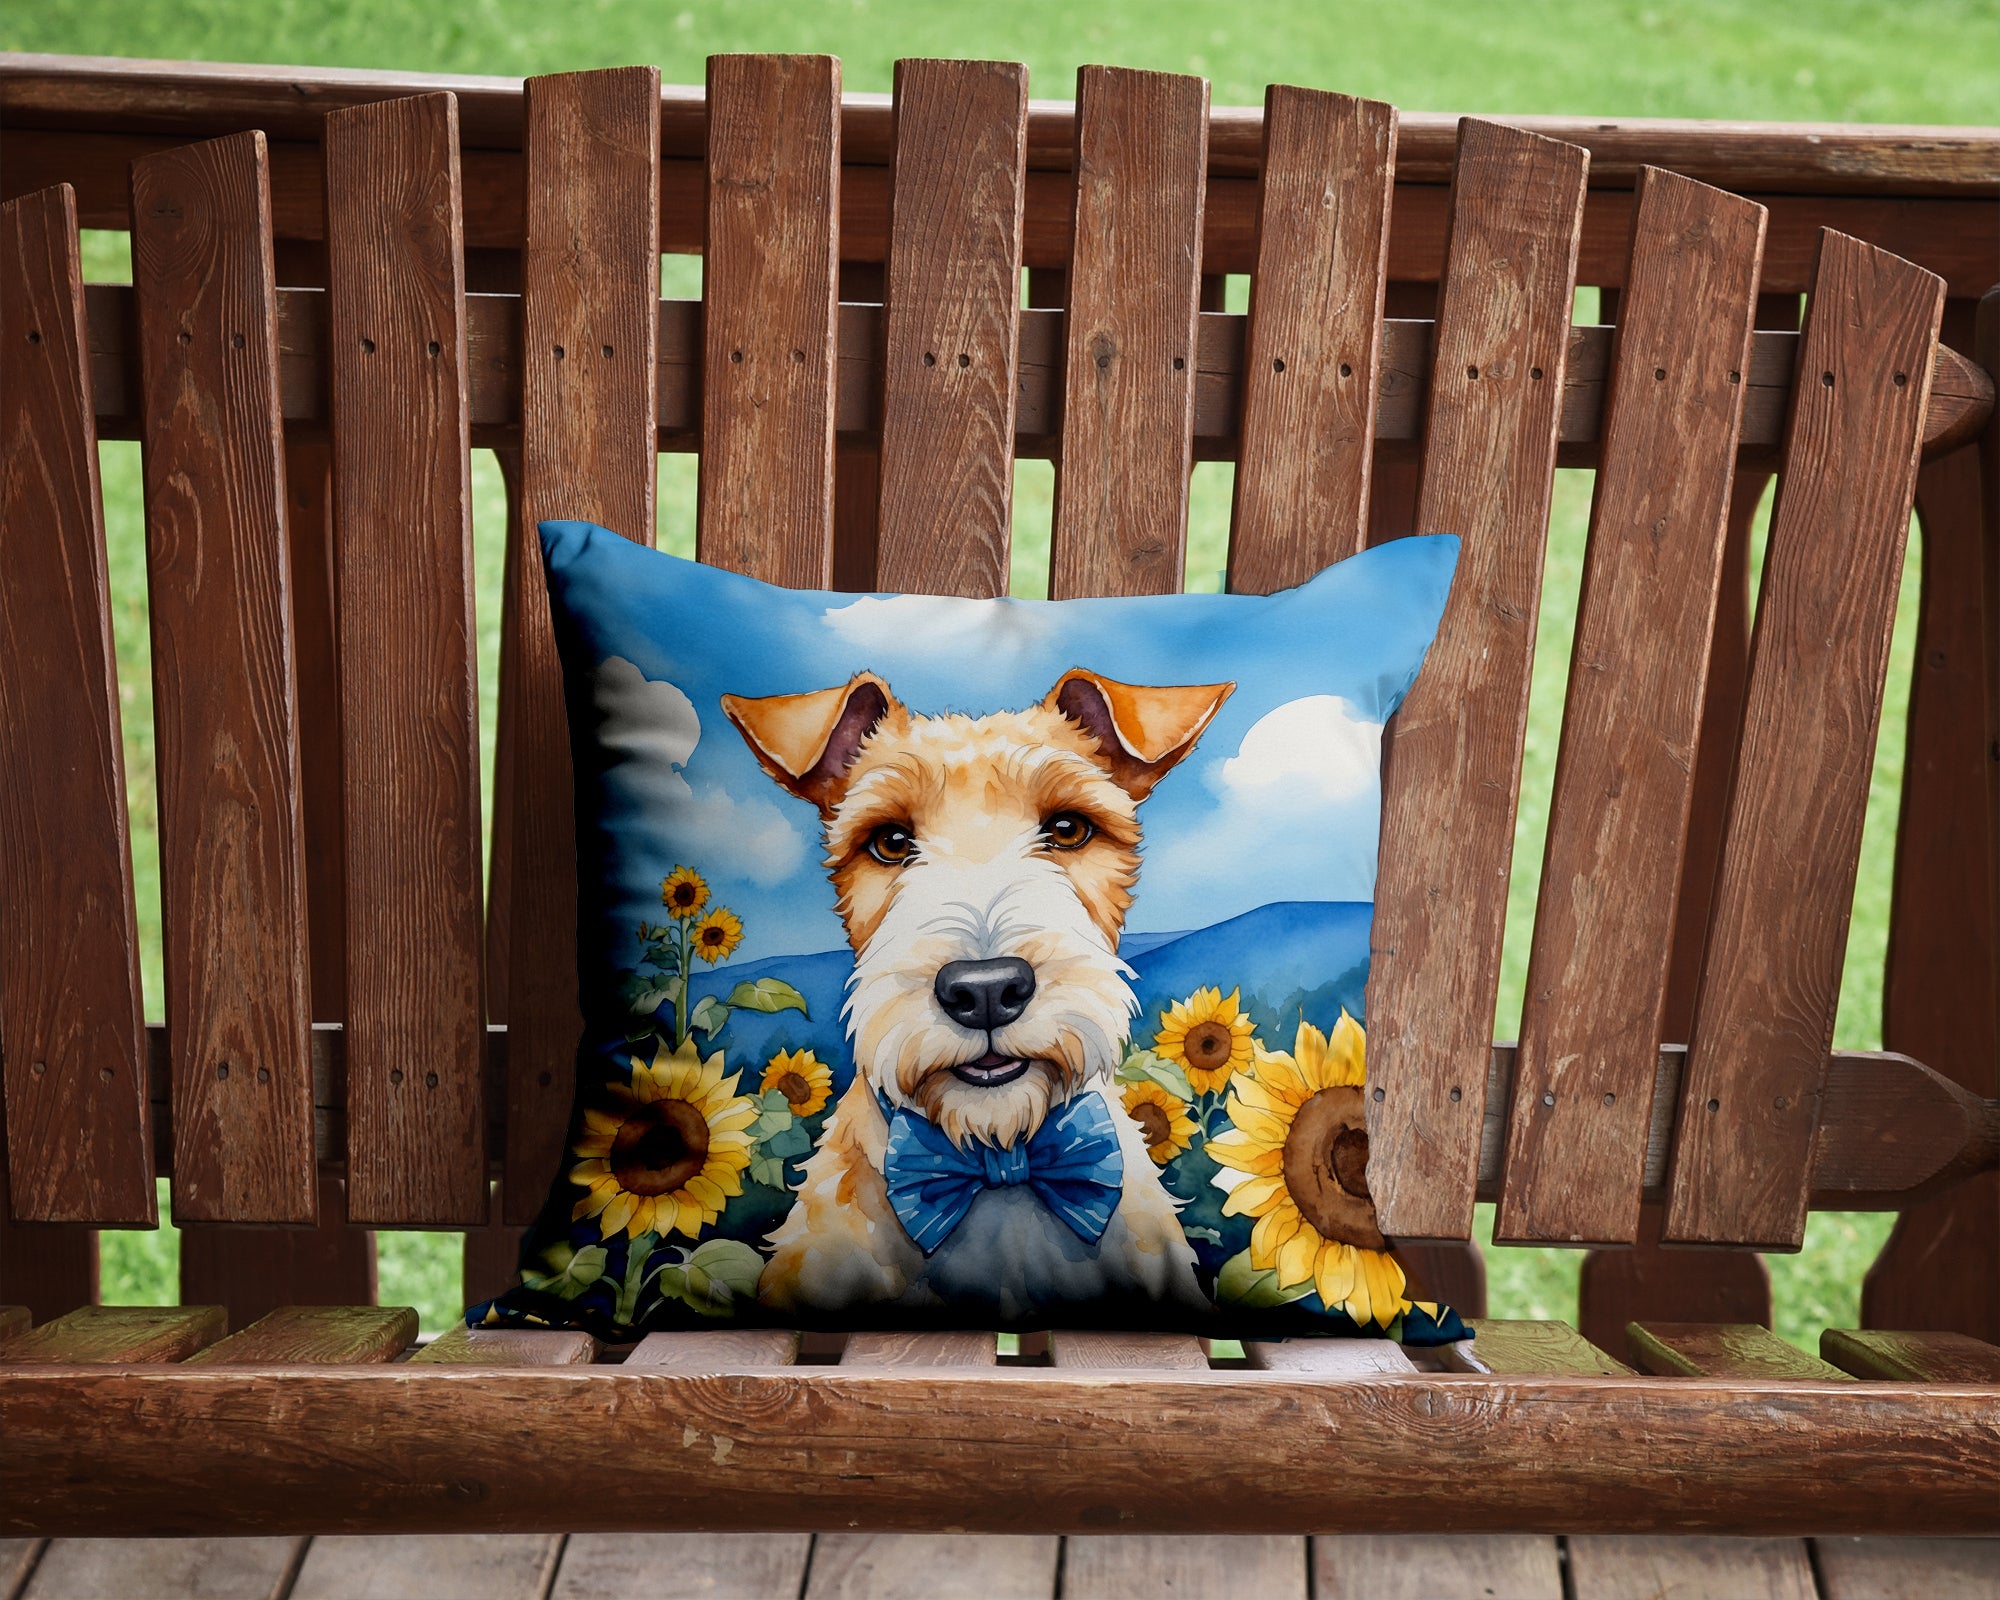 Buy this Fox Terrier in Sunflowers Throw Pillow